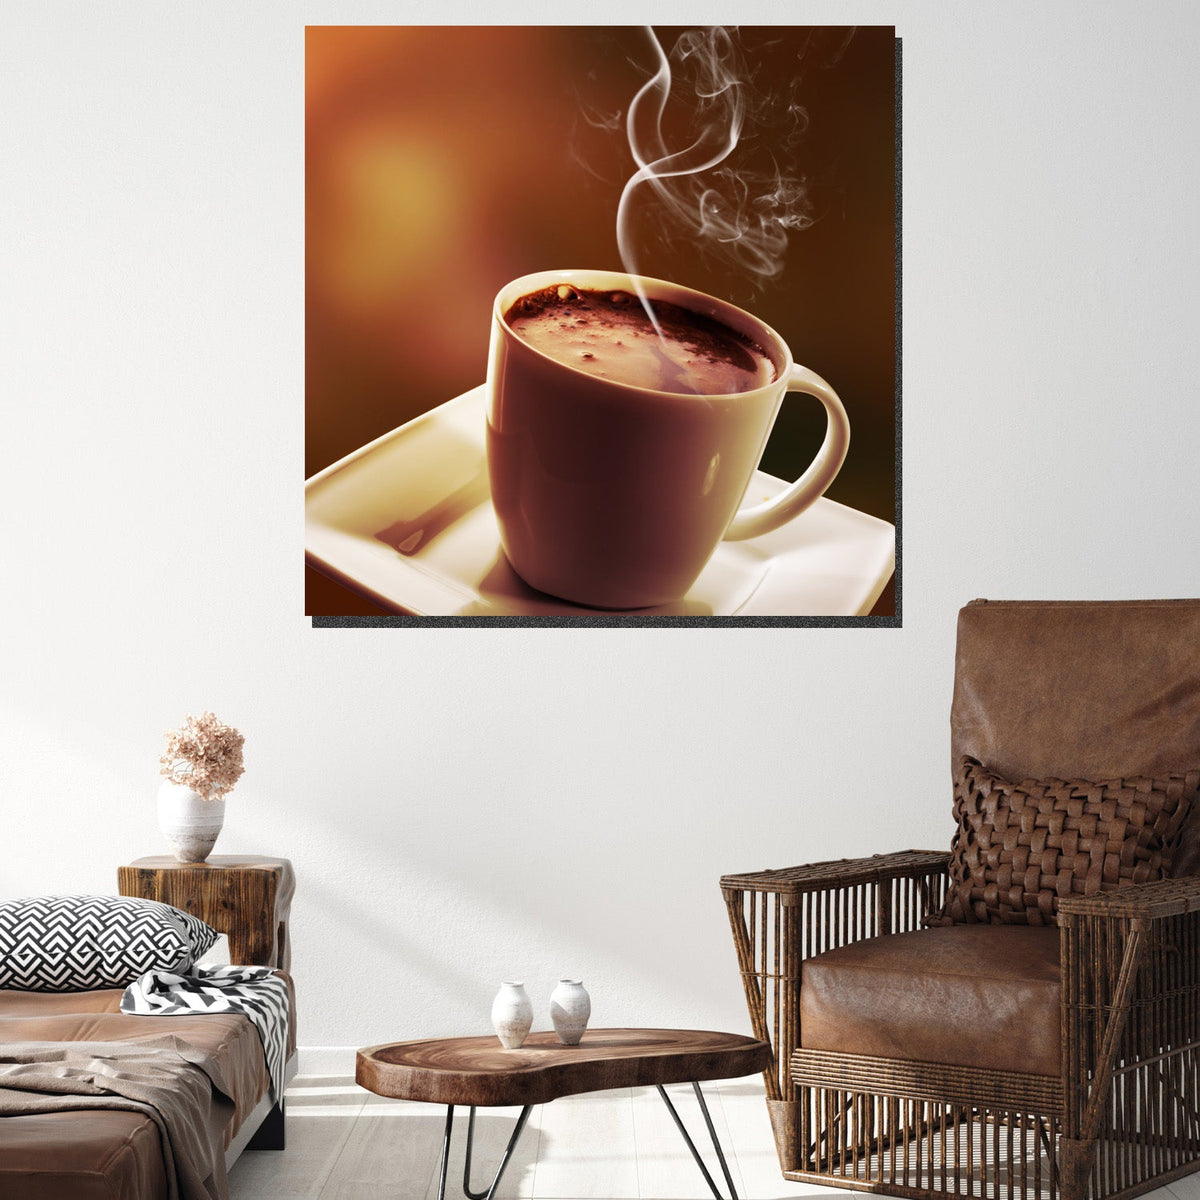 https://cdn.shopify.com/s/files/1/0387/9986/8044/products/CoffeeLoverCanvasArtprintStretched-2.jpg